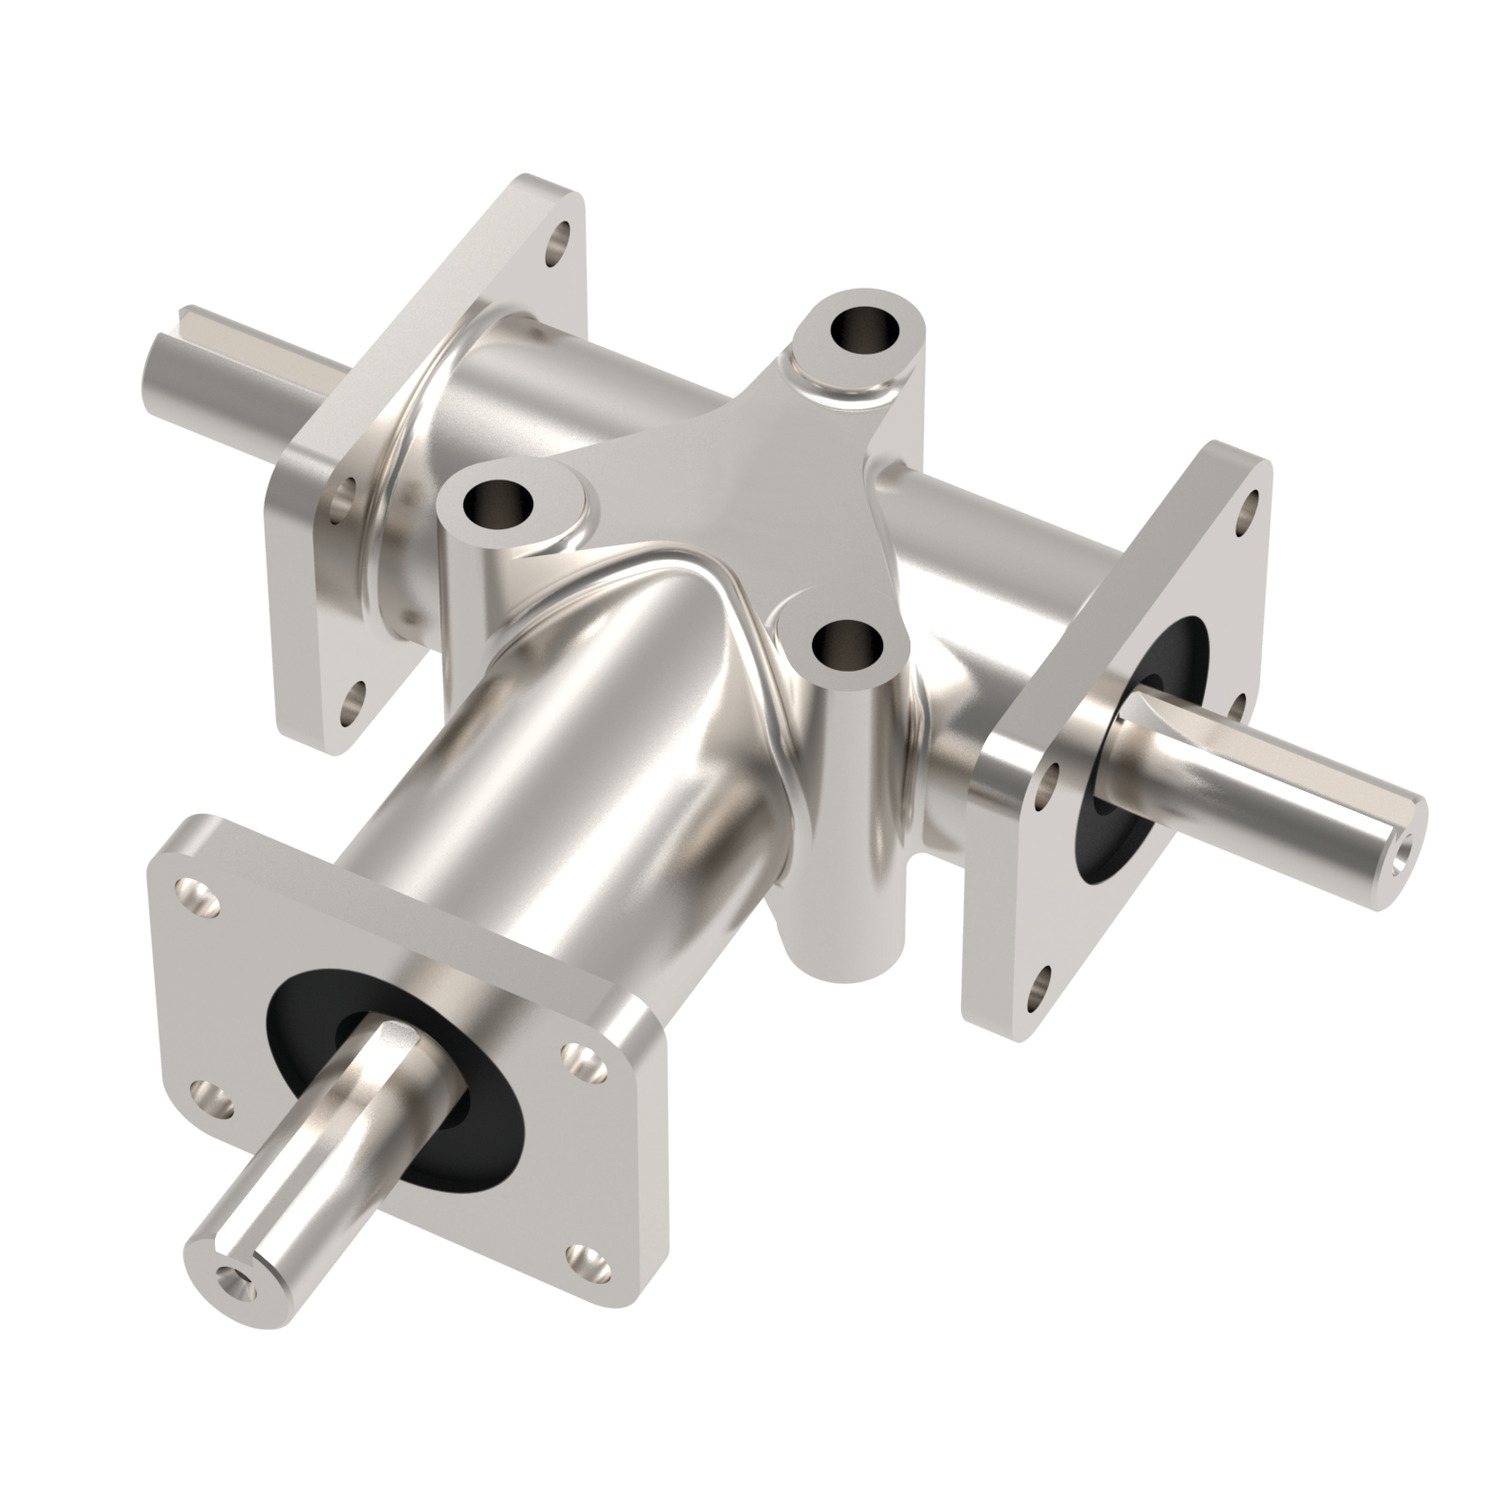 R2353 - Stainless Right Angle Drives - 3 Shafts